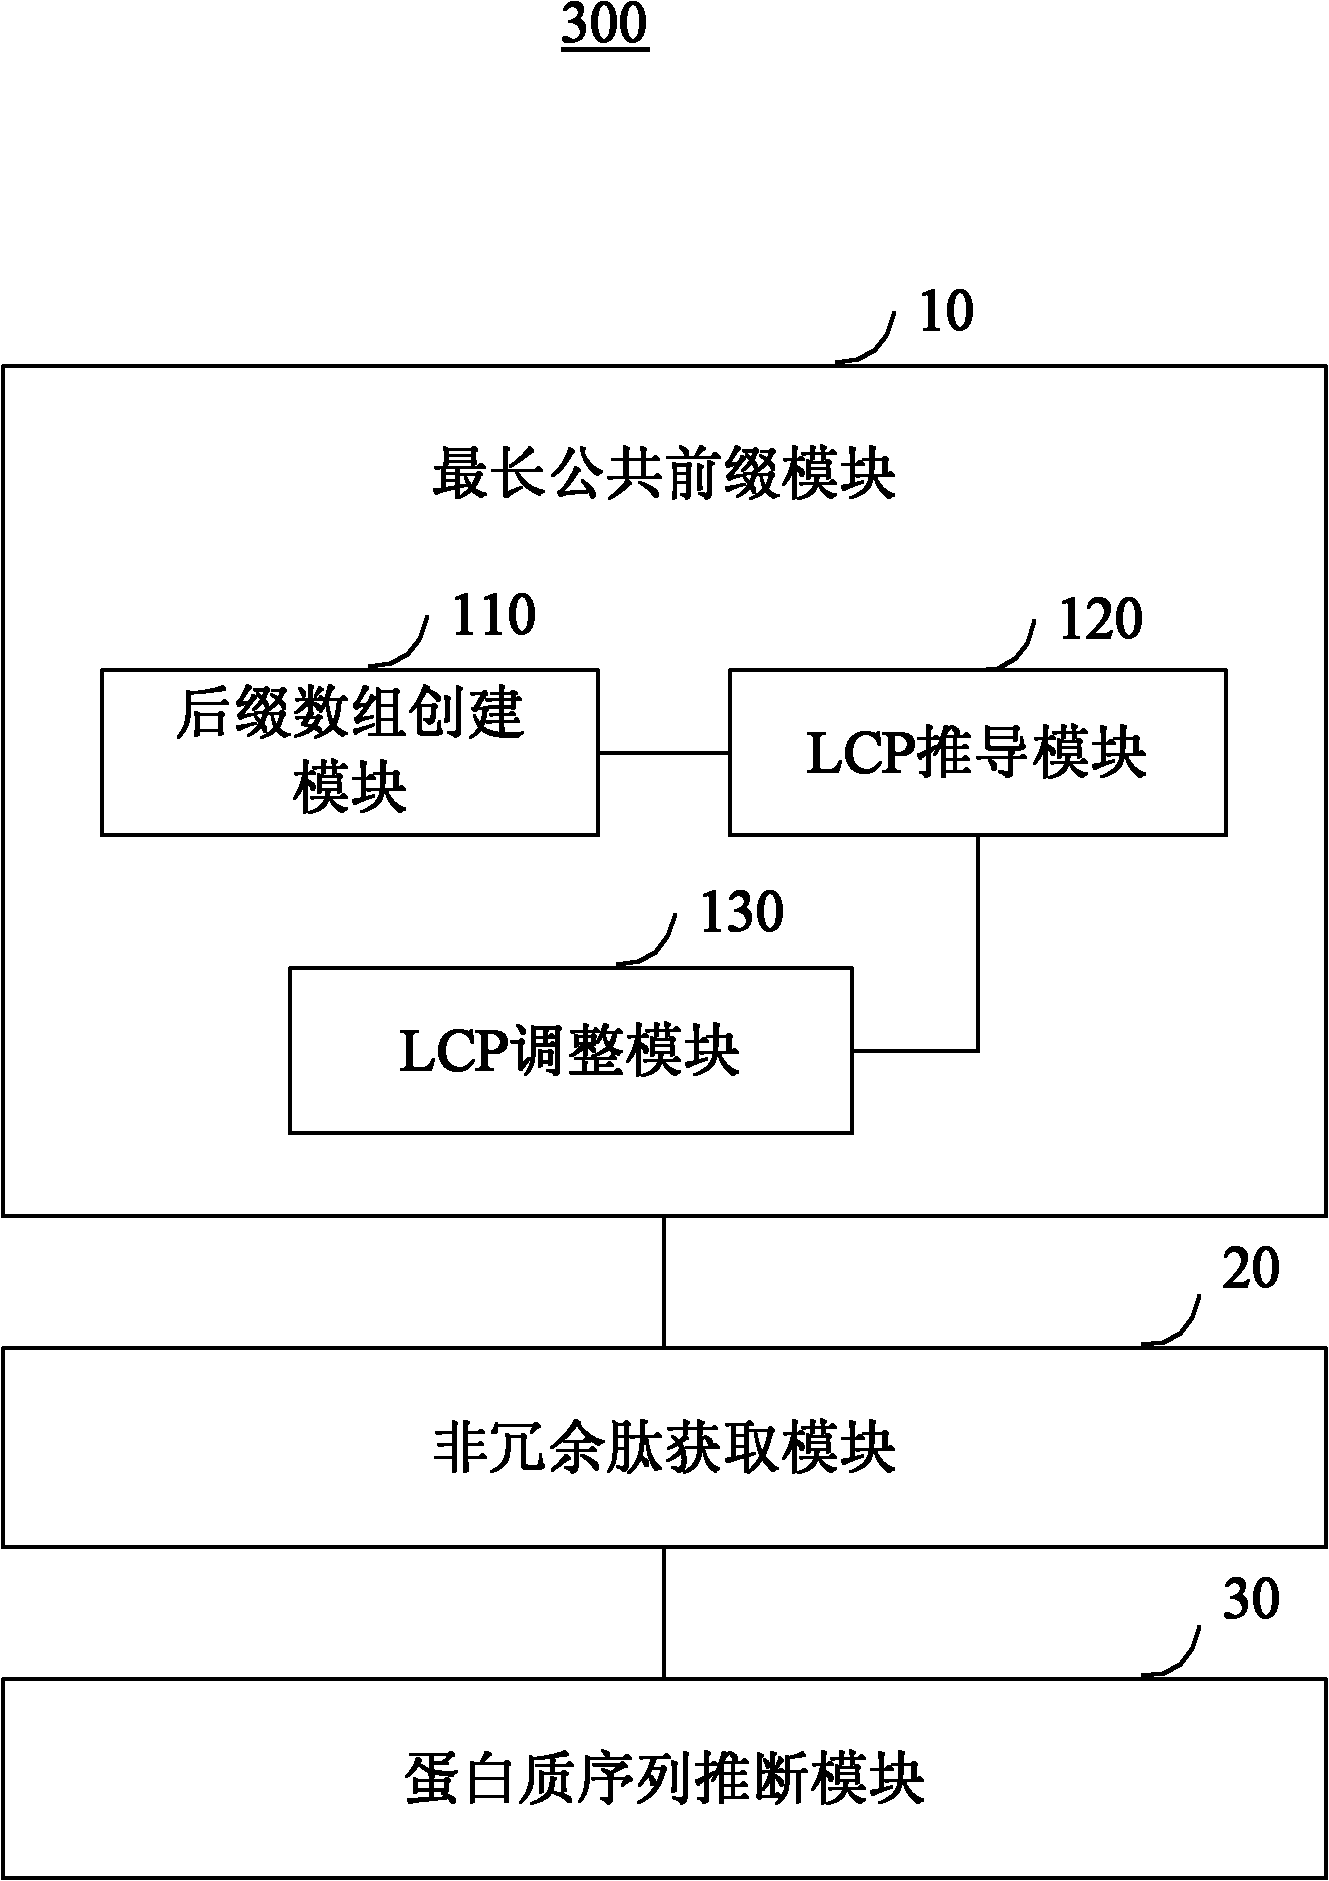 Method and system for accelerating large-scale protein identification by using suffix array